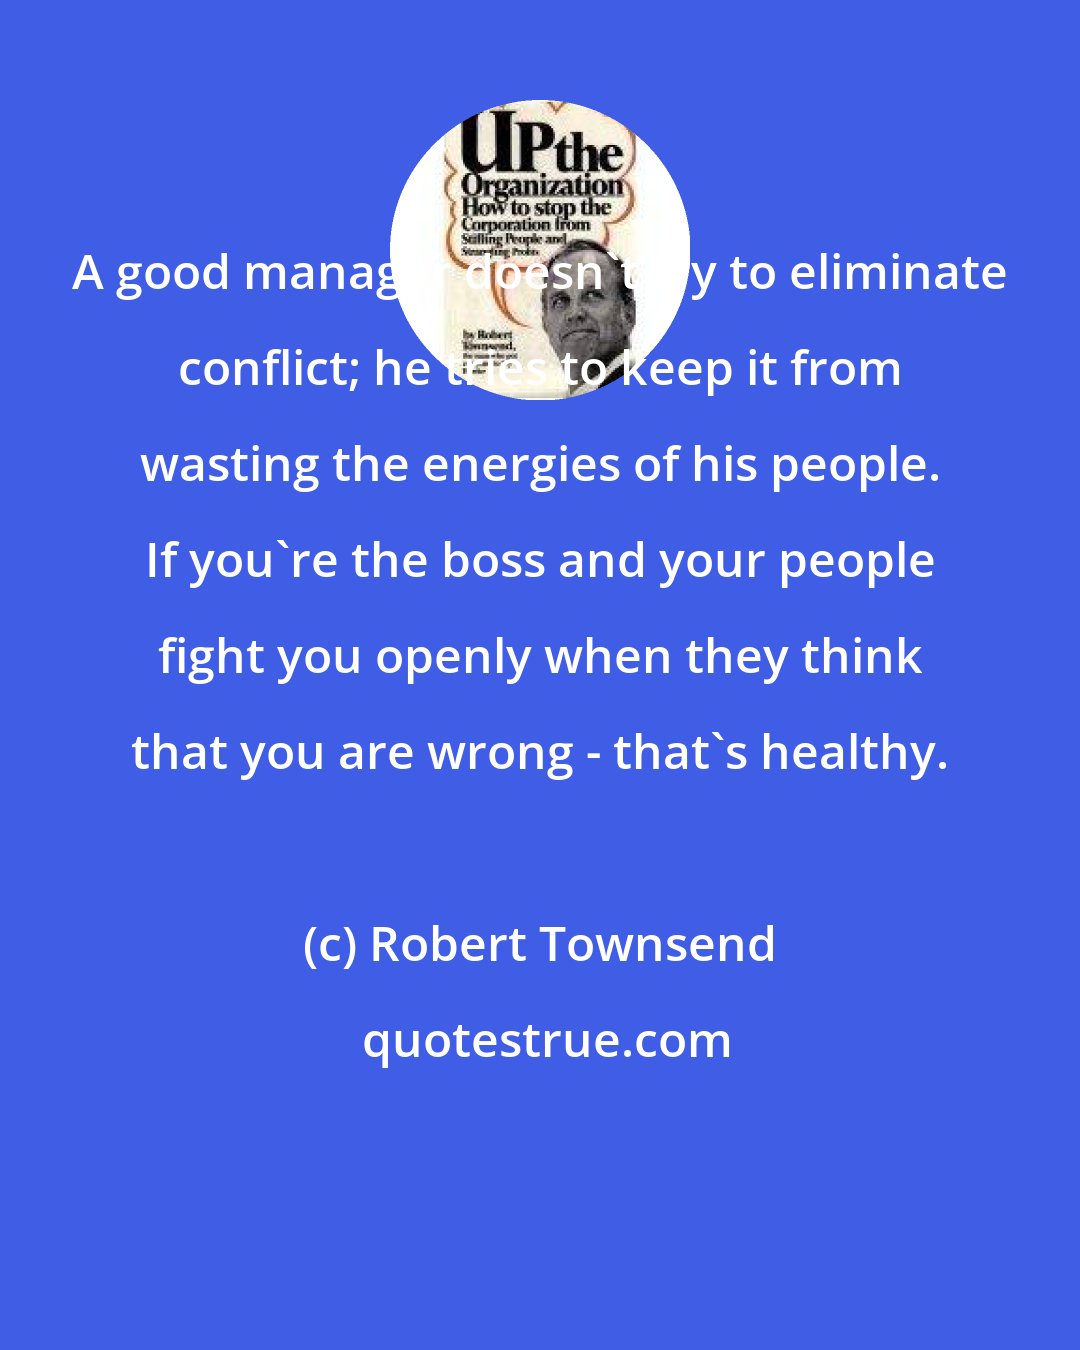 Robert Townsend: A good manager doesn't try to eliminate conflict; he tries to keep it from wasting the energies of his people. If you're the boss and your people fight you openly when they think that you are wrong - that's healthy.